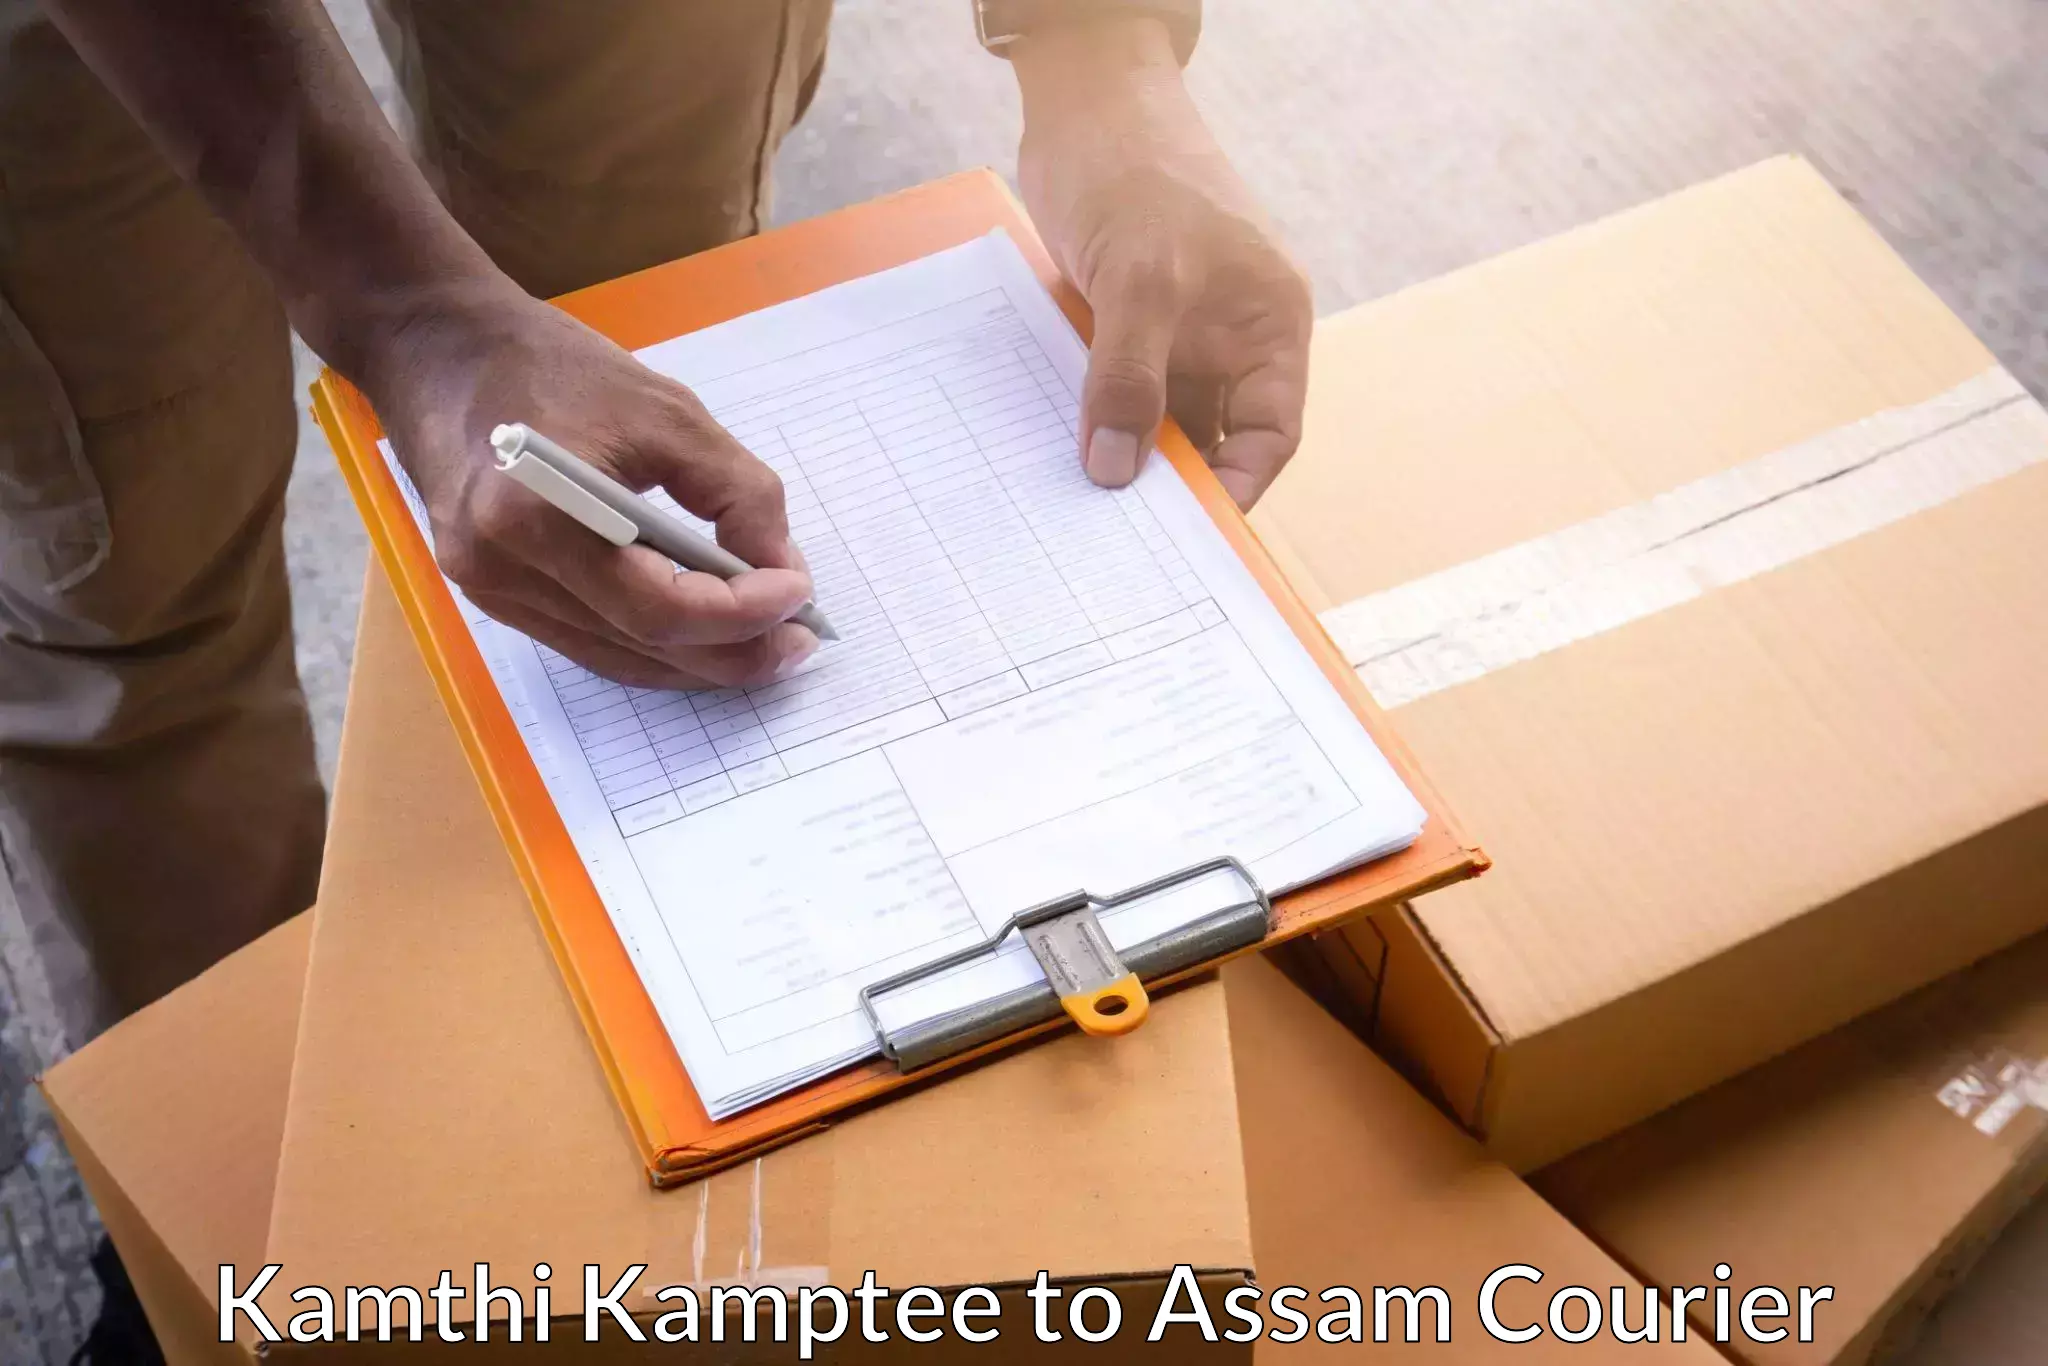 Residential courier service Kamthi Kamptee to Kampur